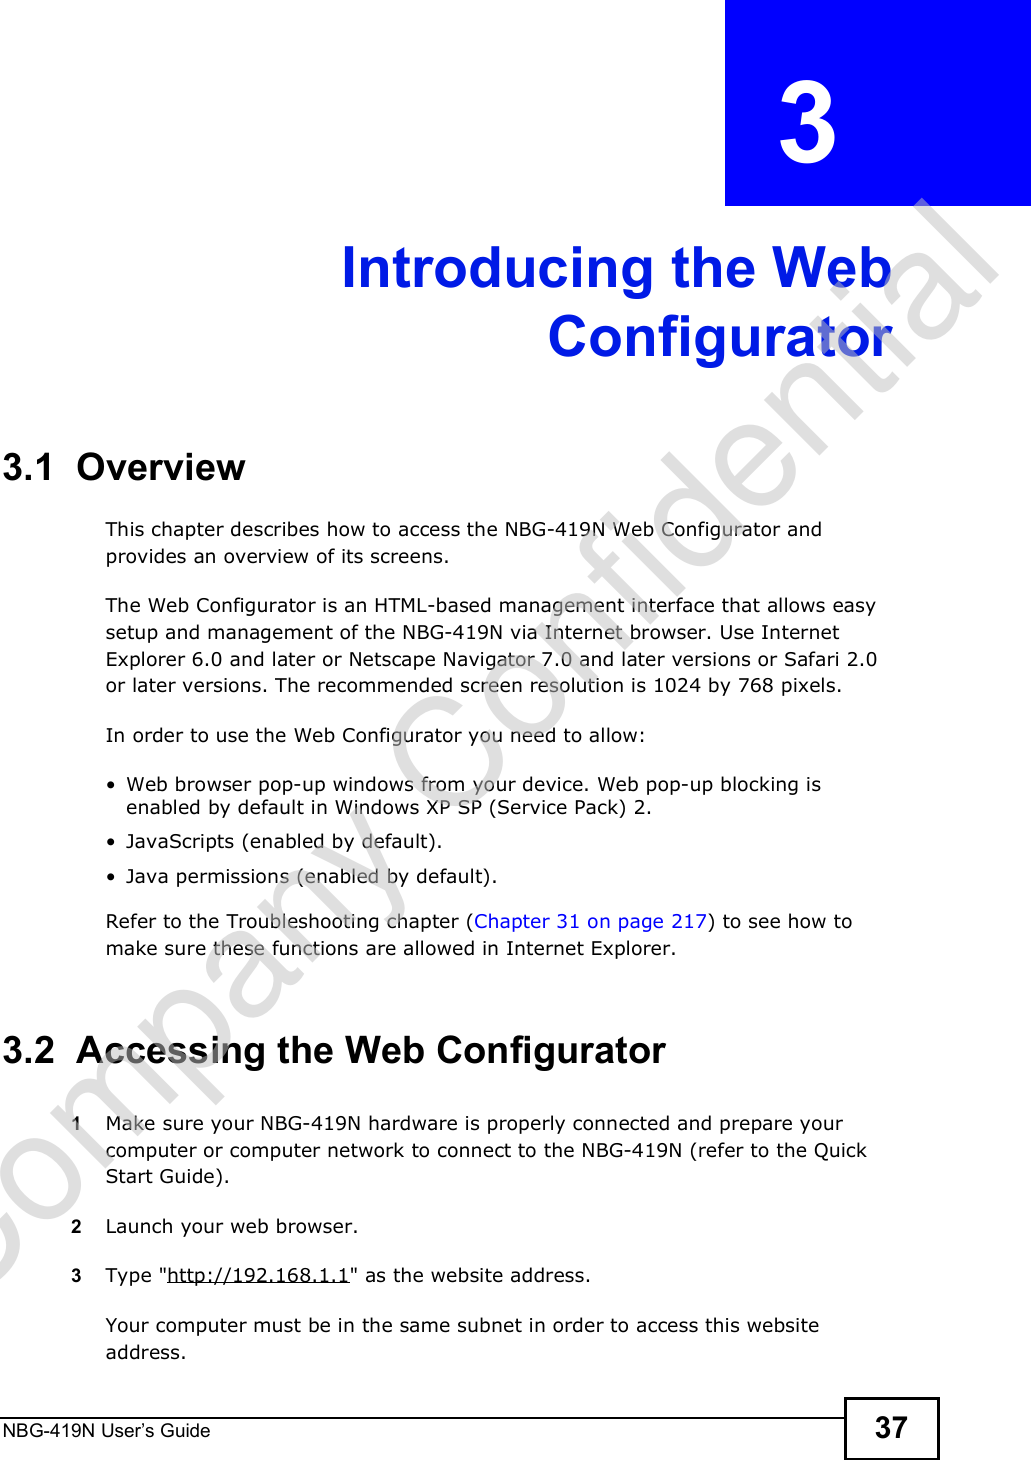 NBG-419N User s Guide 37CHAPTER  3 Introducing the WebConfigurator3.1  OverviewThis chapter describes how to access the NBG-419N Web Configurator and provides an overview of its screens.The Web Configurator is an HTML-based management interface that allows easy setup and management of the NBG-419N via Internet browser. Use Internet Explorer 6.0 and later or Netscape Navigator 7.0 and later versions or Safari 2.0 or later versions. The recommended screen resolution is 1024 by 768 pixels.In order to use the Web Configurator you need to allow: Web browser pop-up windows from your device. Web pop-up blocking is enabled by default in Windows XP SP (Service Pack) 2. JavaScripts (enabled by default). Java permissions (enabled by default).Refer to the Troubleshooting chapter (Chapter 31 on page 217) to see how to make sure these functions are allowed in Internet Explorer.3.2  Accessing the Web Configurator1Make sure your NBG-419N hardware is properly connected and prepare your computer or computer network to connect to the NBG-419N (refer to the Quick Start Guide).2Launch your web browser.3Type &quot;http://192.168.1.1&quot; as the website address. Your computer must be in the same subnet in order to access this website address.Company Confidential